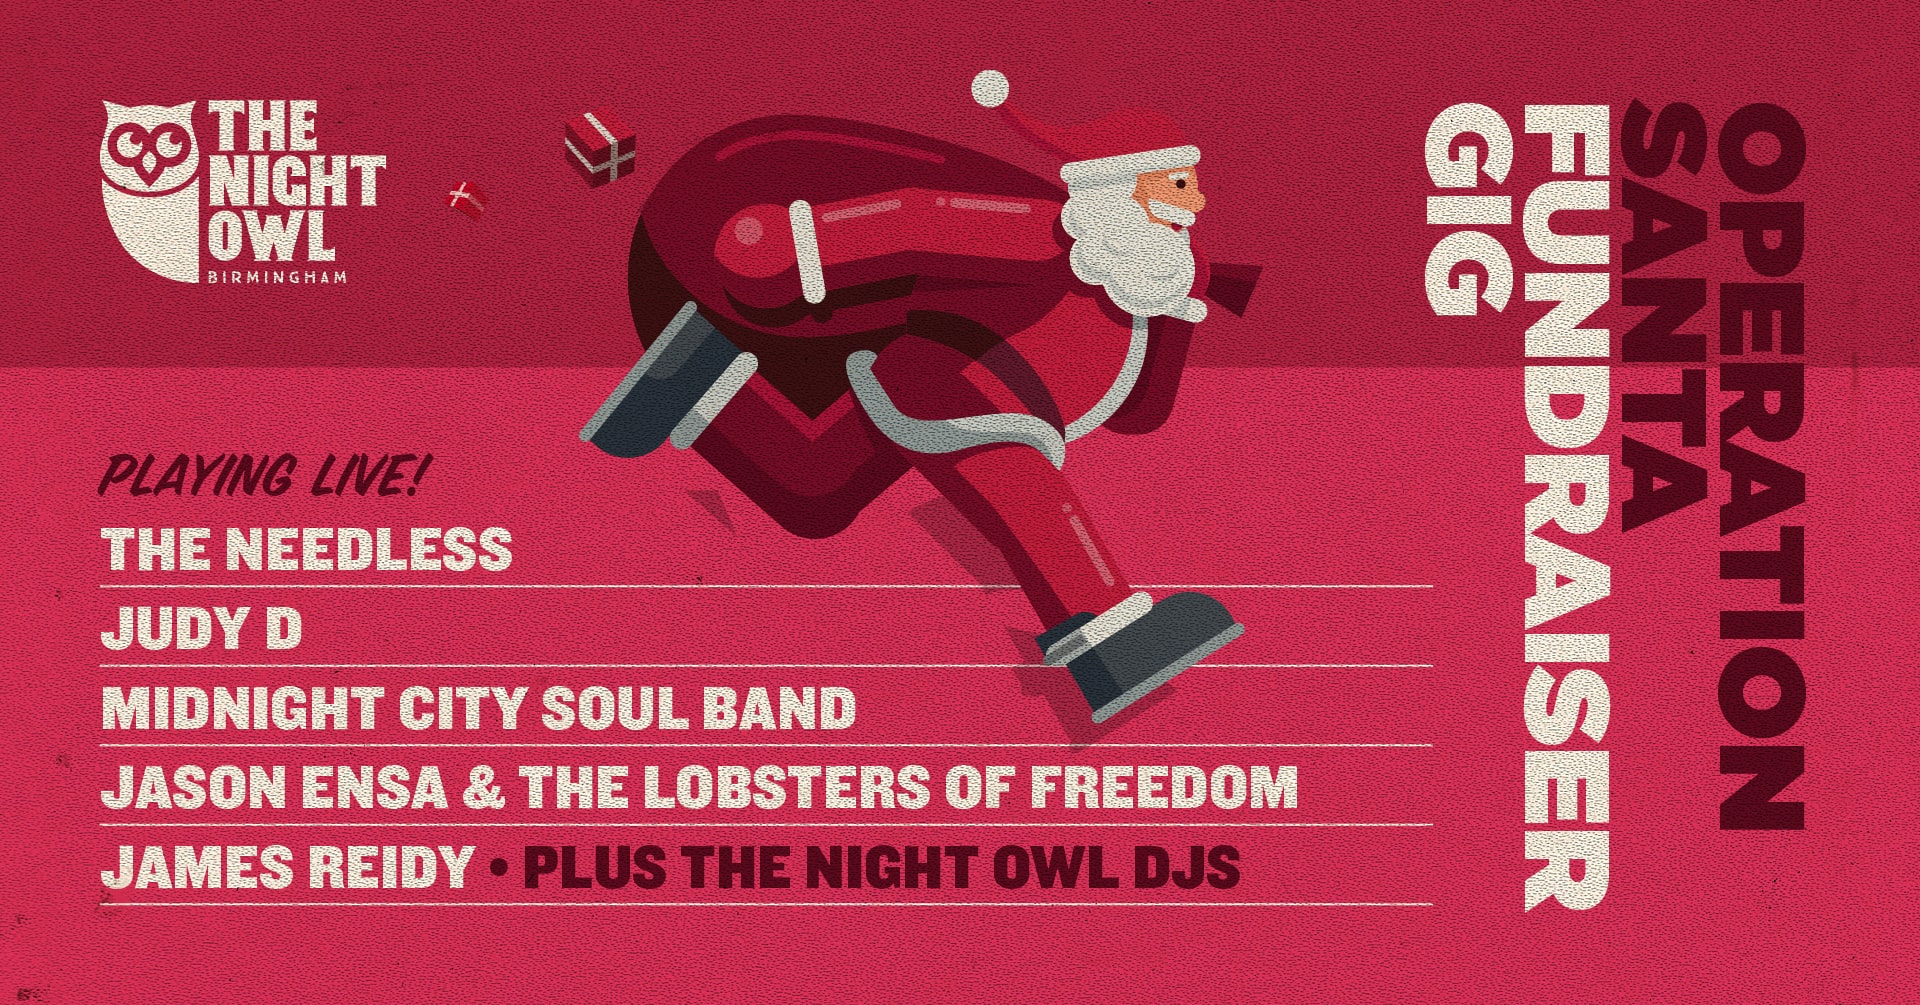 Operation Santa at The Night Owl: A fundraiser with live music from The Needless, Midnight City Soul Band, Jason Ensa and The Lobsters of Freedom, James Reidy and Judy D. On Sunday 14th November!